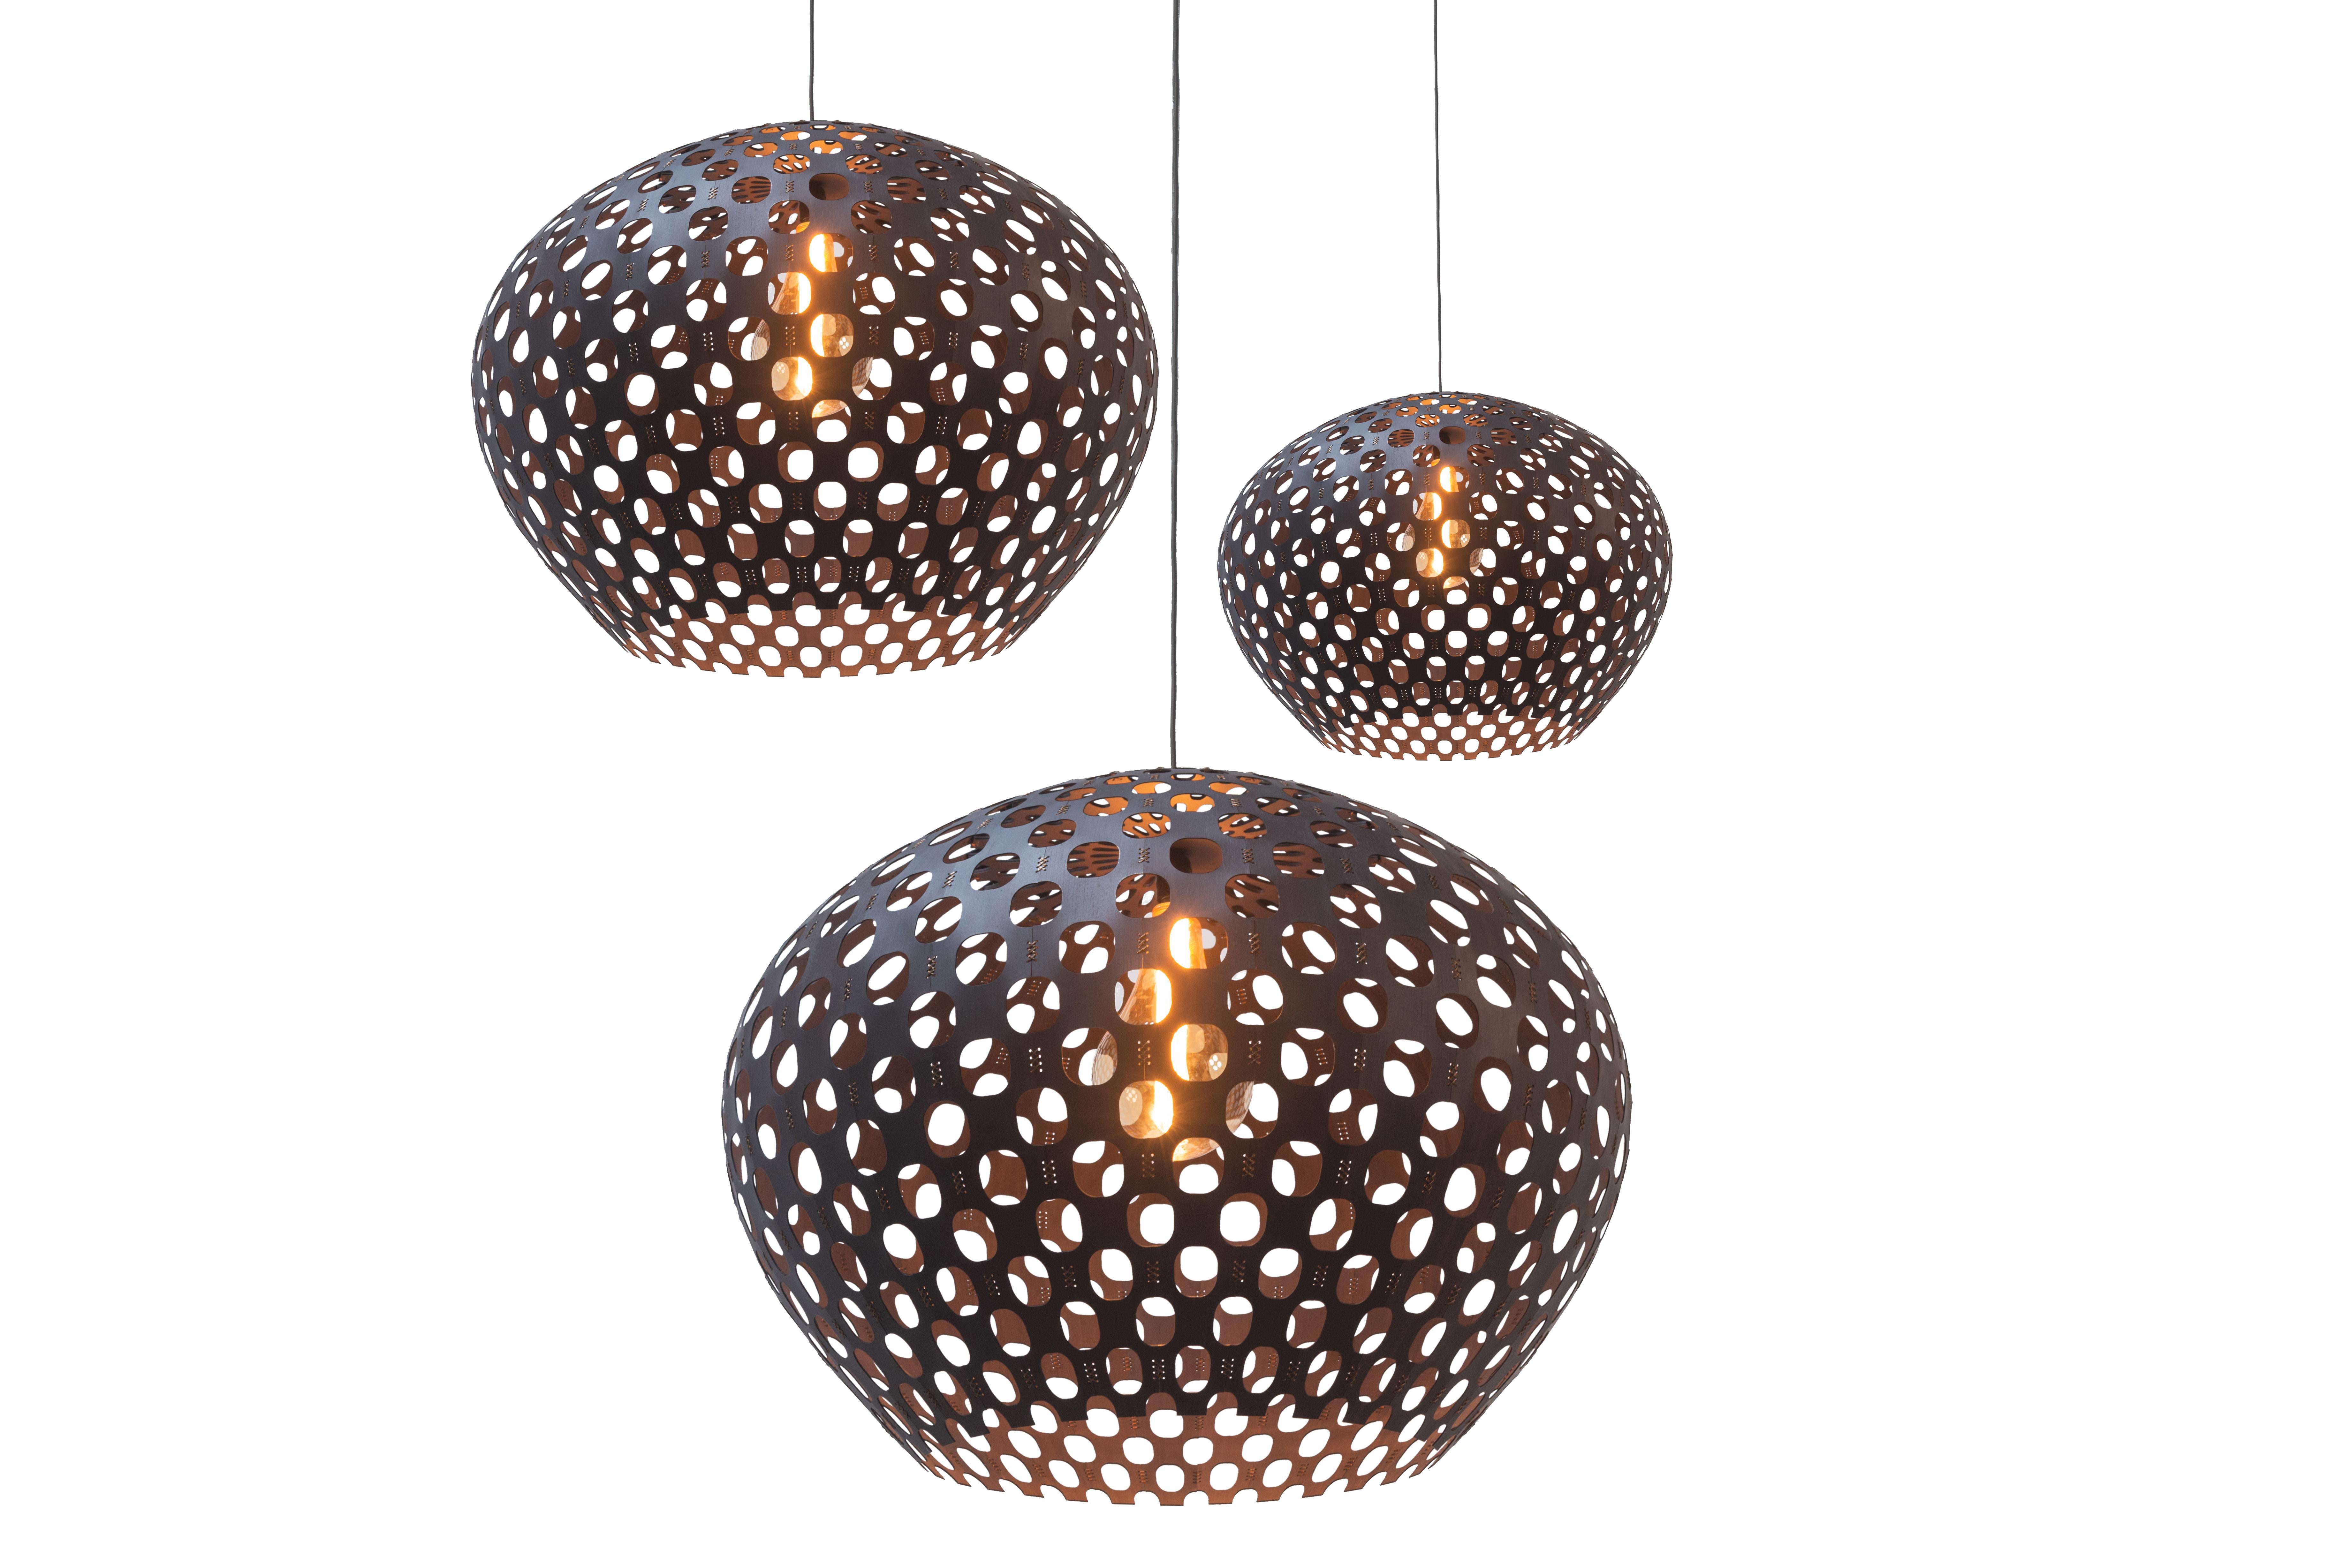 Other Specifications: 
- 30 Bamboo veneers hand woven with silk and cotton threads. 
-Cloth Cable color kakhi
- Color: This lamp color can be customized: interior and exterior color 
- This lamp is super light due the material, weight: 10